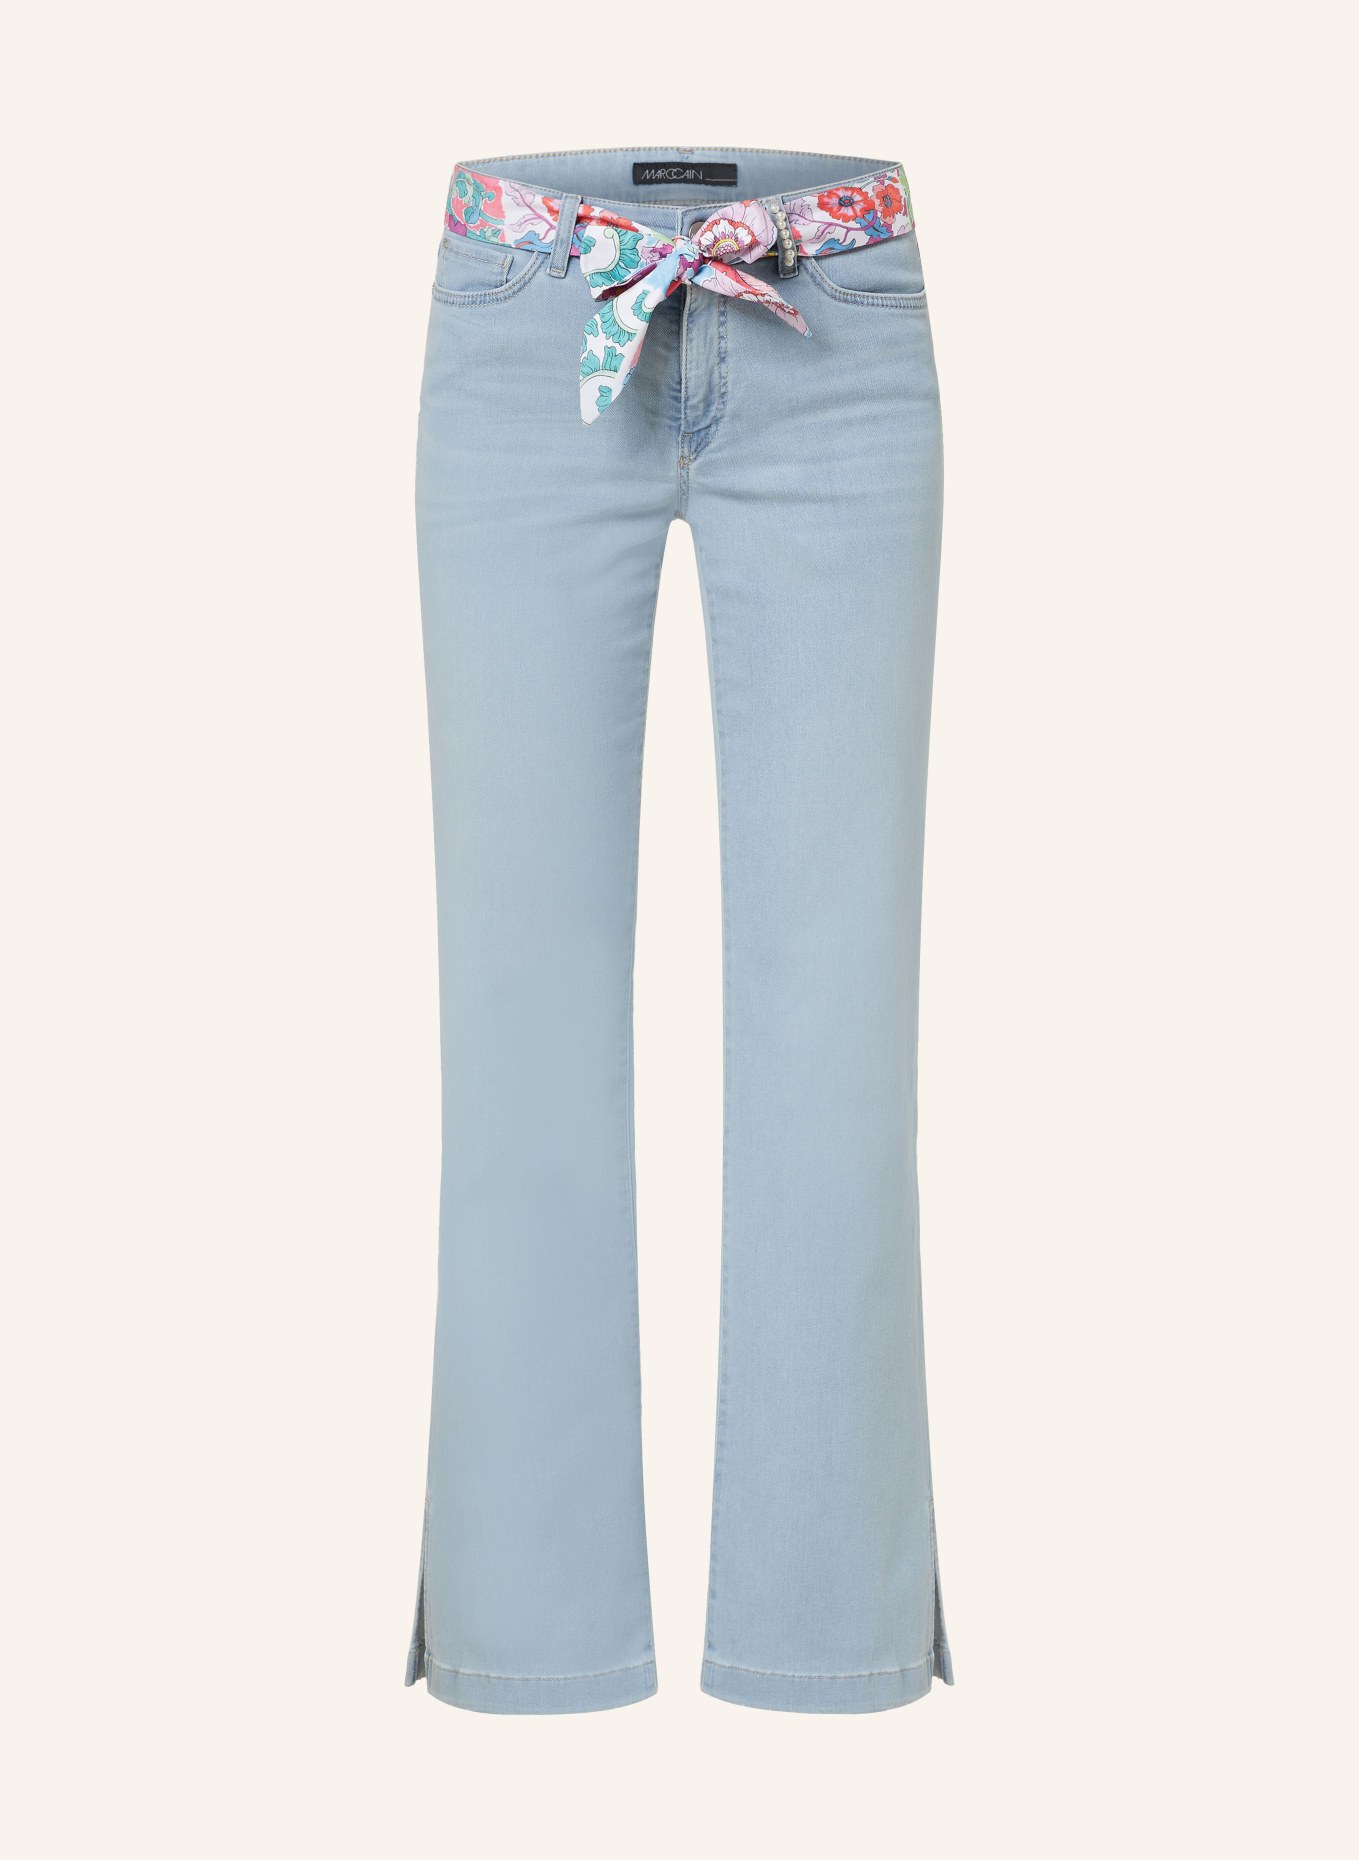 MARC CAIN Bootcut Jeans, Farbe: 351 baby blue (Bild 1)